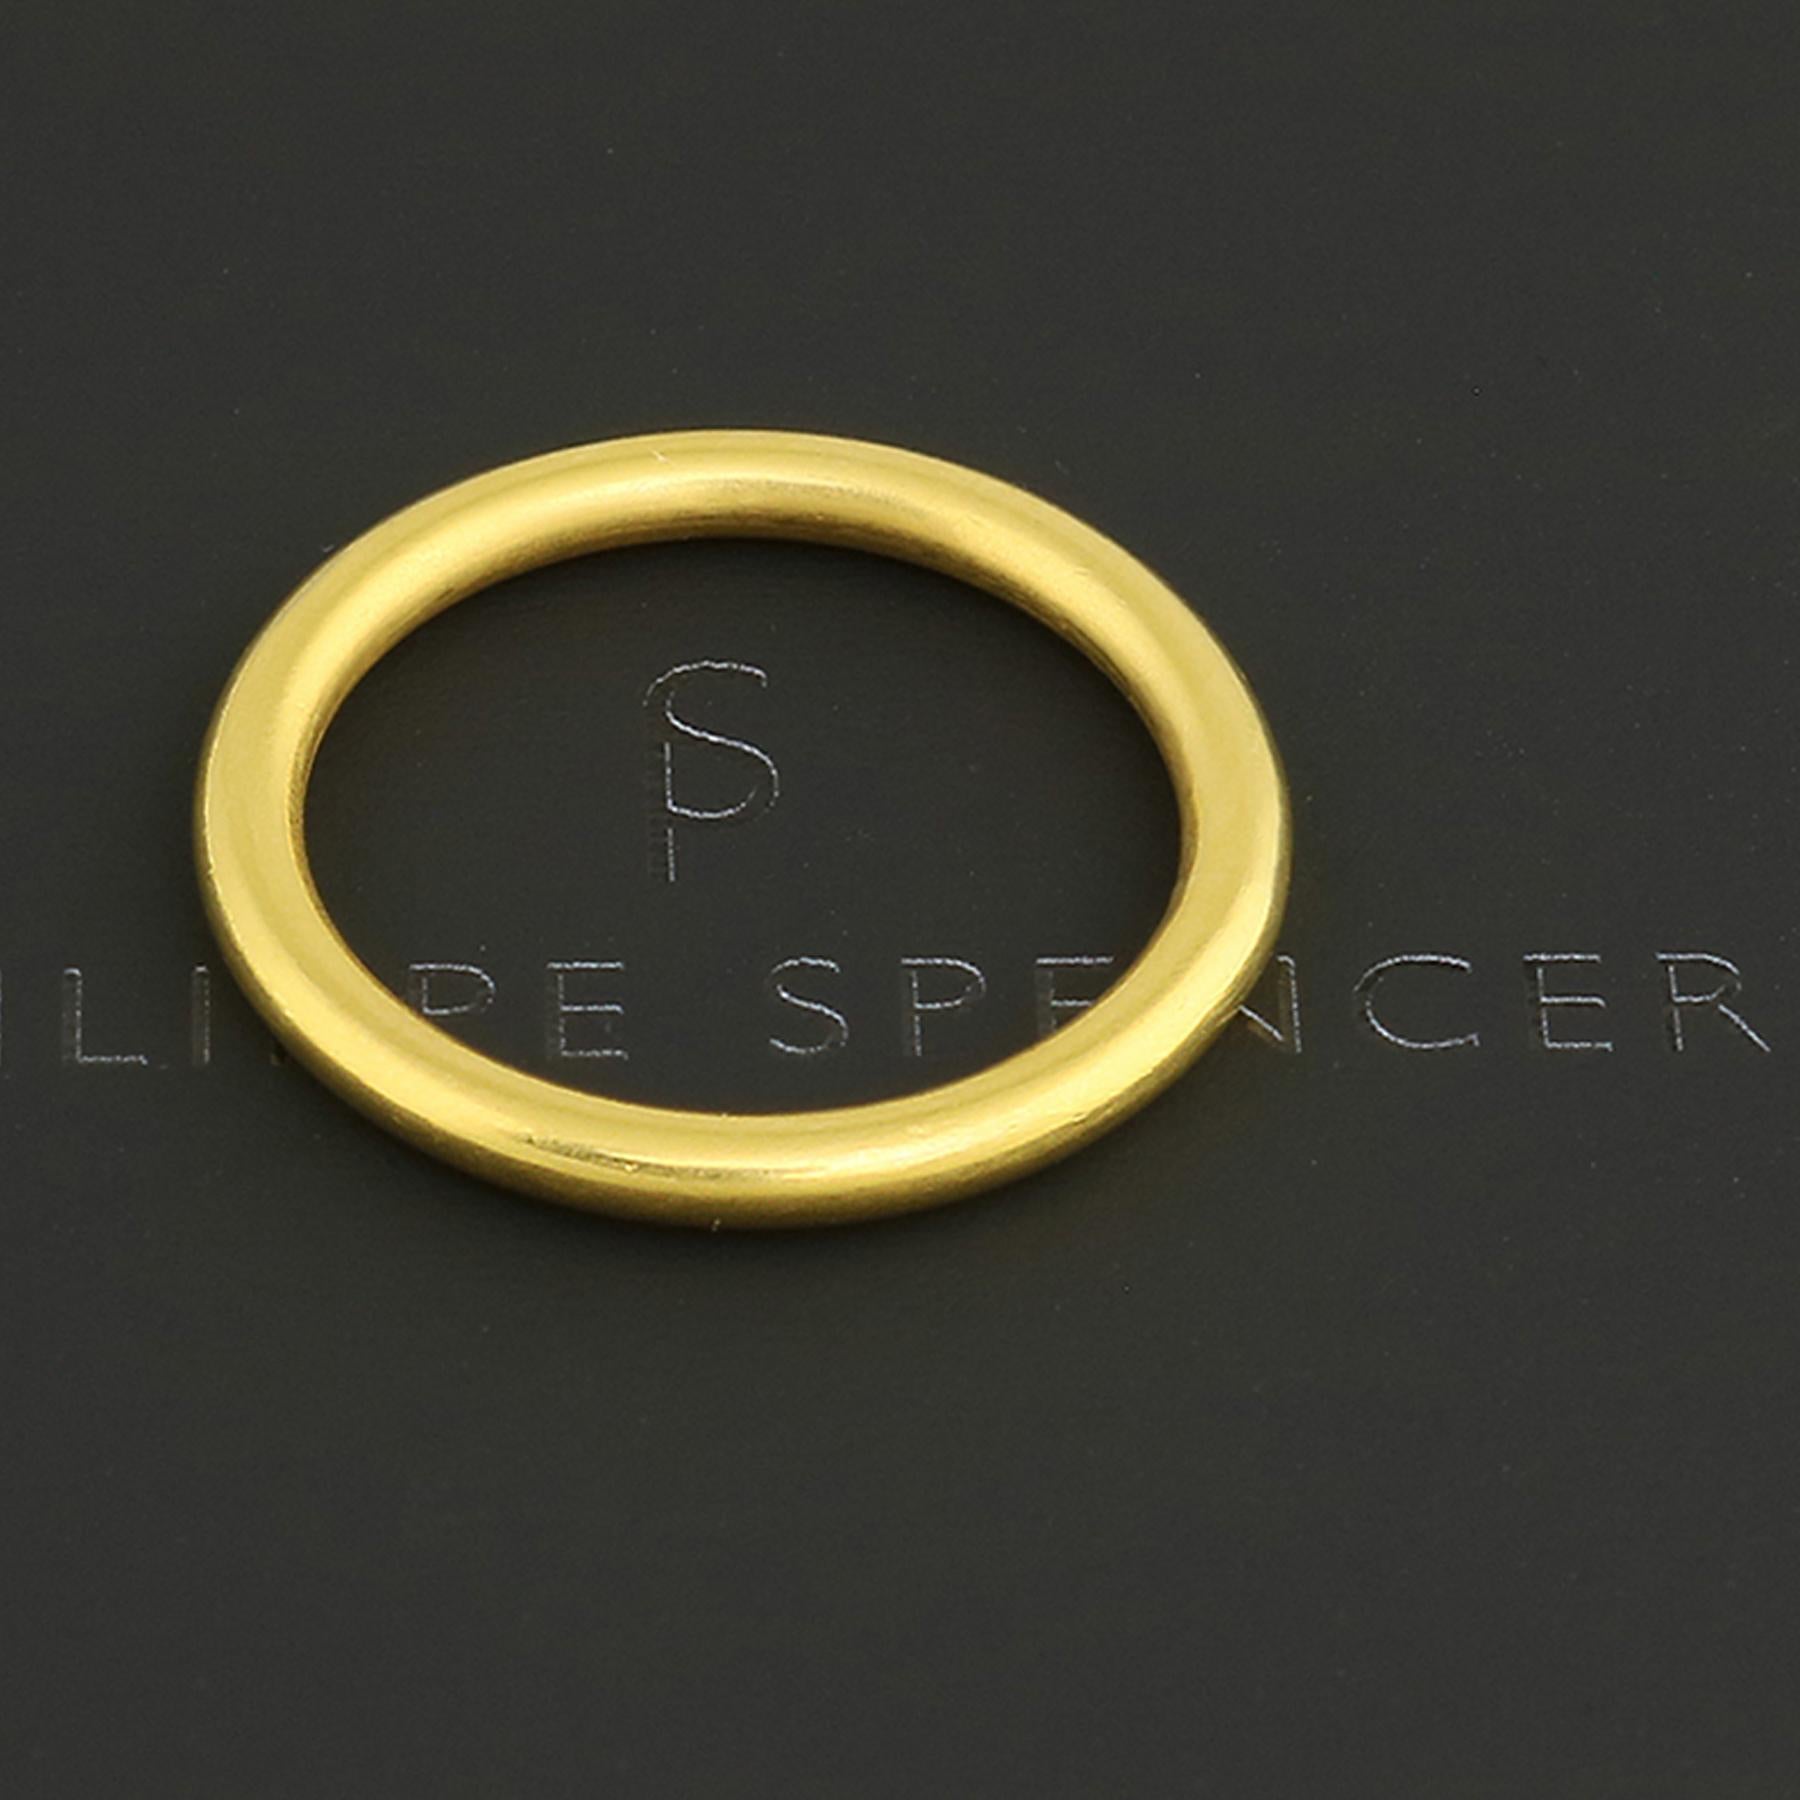 PHILIPPE-SPENCER - 2.3mm Round Solid 20K Gold Hand-Forged Ring. Organic Shape & Matte Finish. Completely Hand-Forged. Each is a unique one-of-a-kind work of art. This PHILIPPE SPENCER solid 20K Gold Hand Made ring is extremely popular with both Men